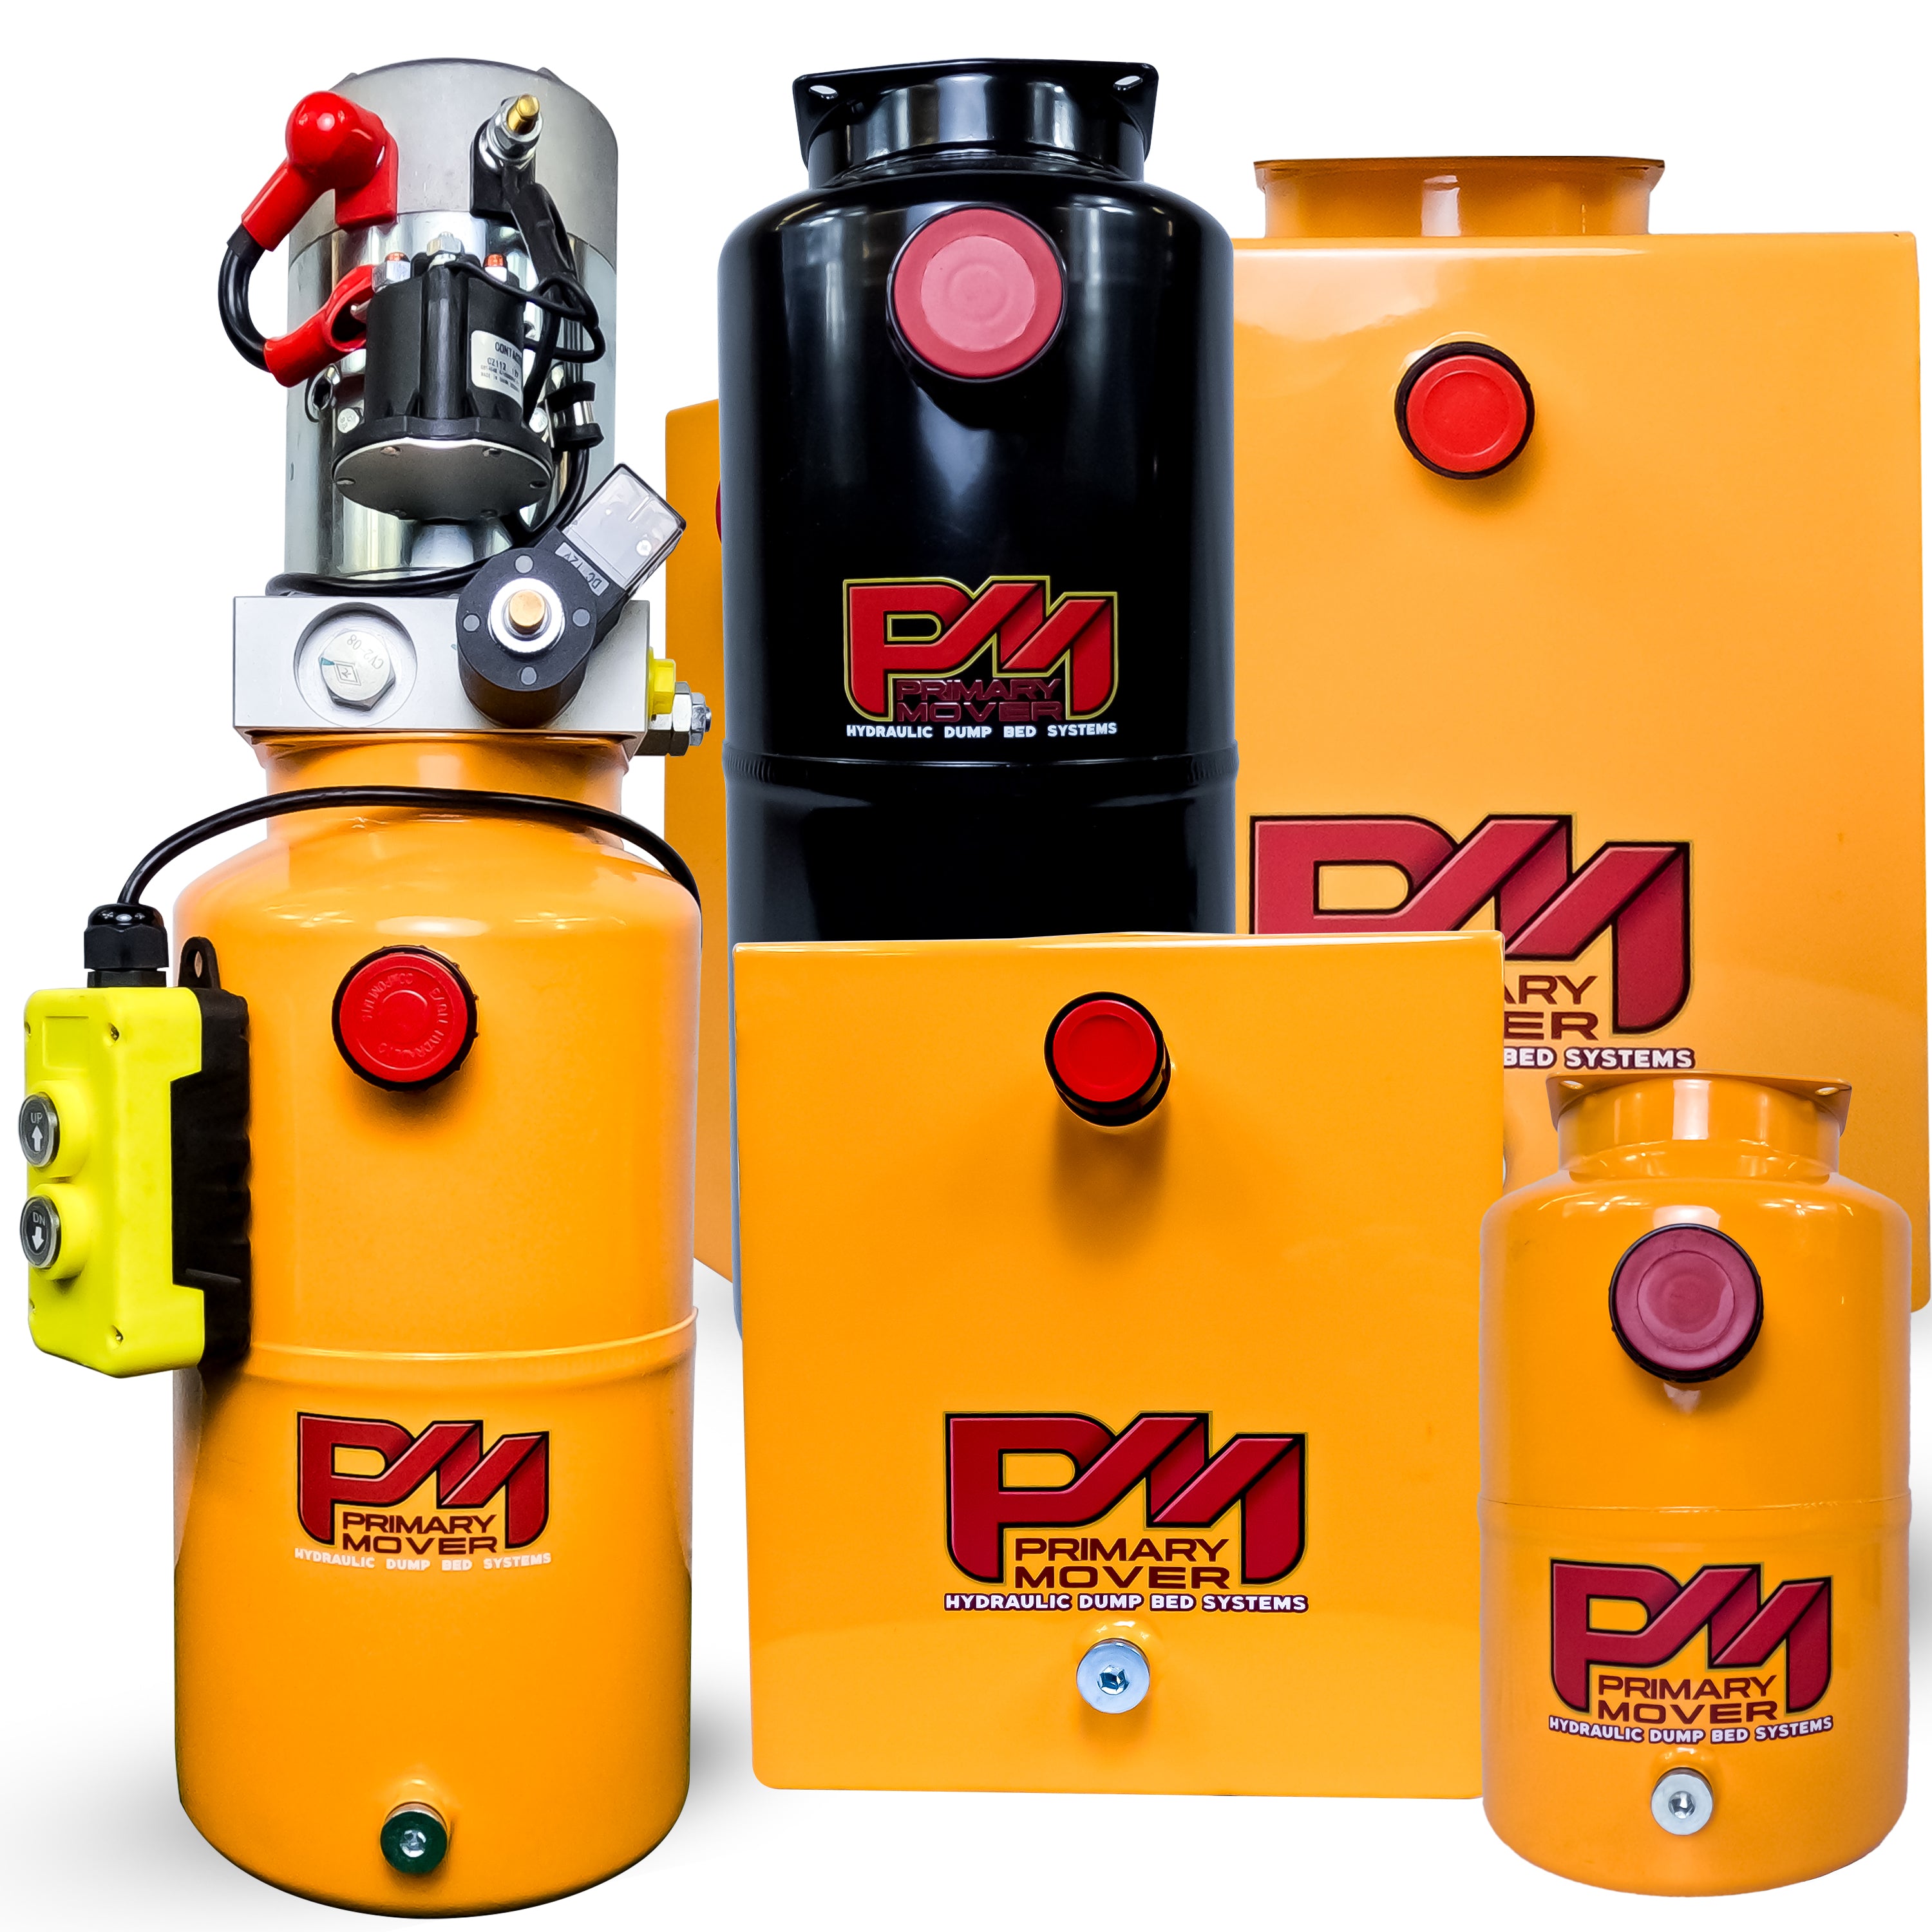 Primary Mover 12V Single-Acting Hydraulic Pump - Steel Reservoir with various yellow and black containers, red cap, and buttons displayed.